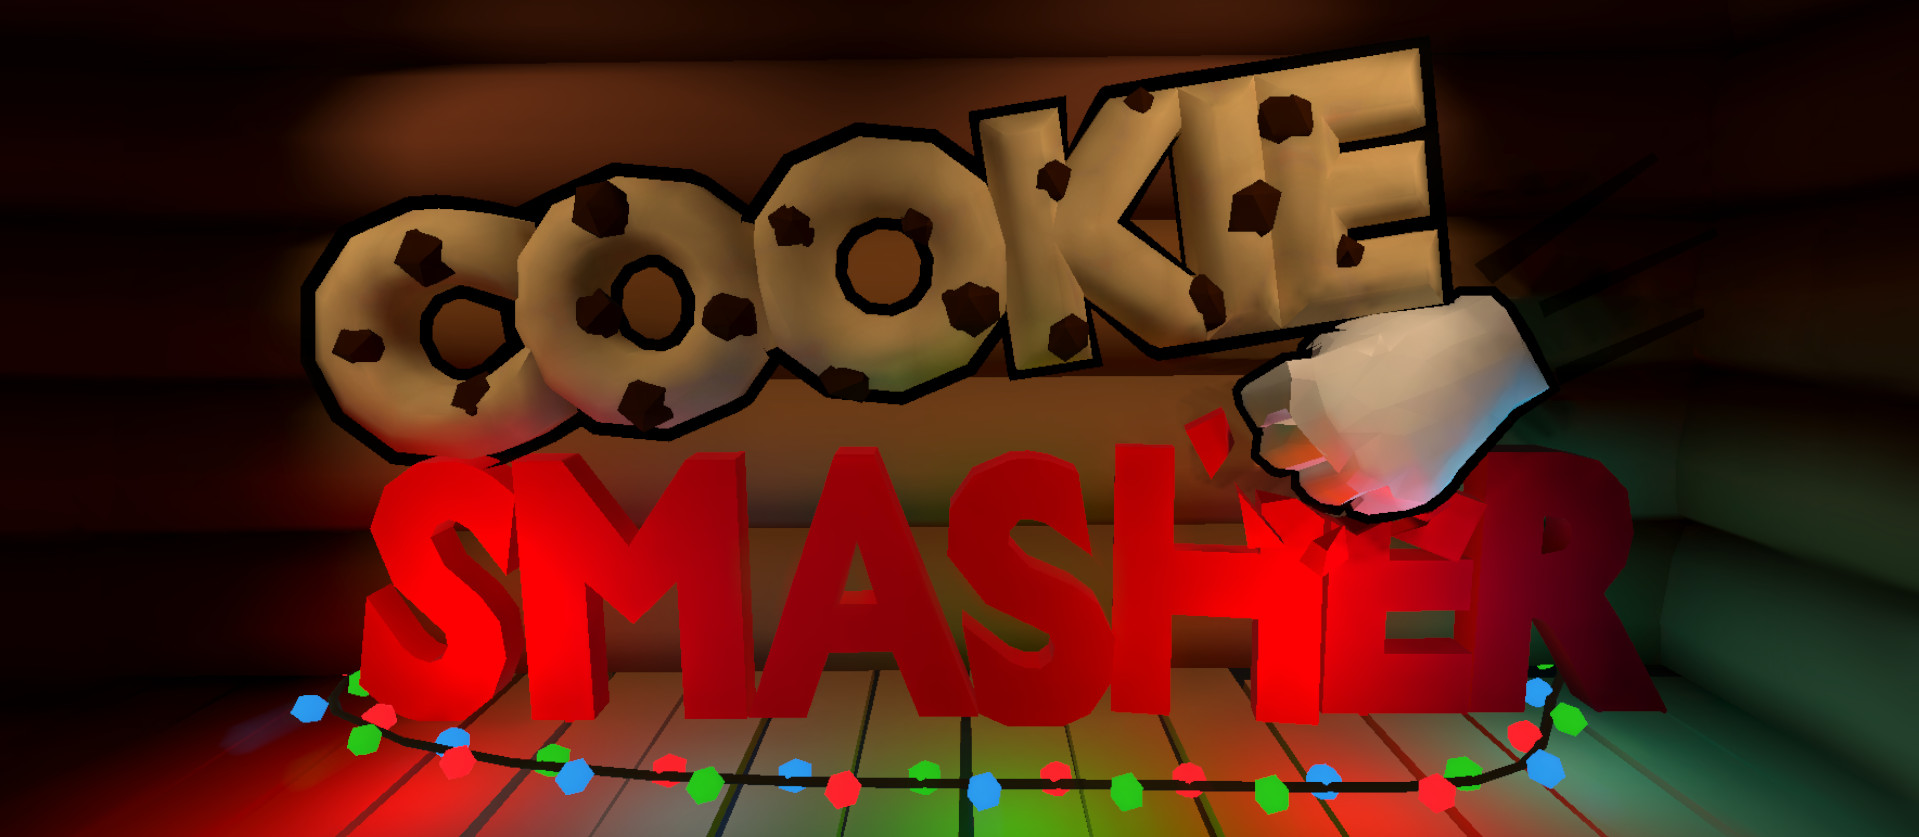 Cookie Smasher